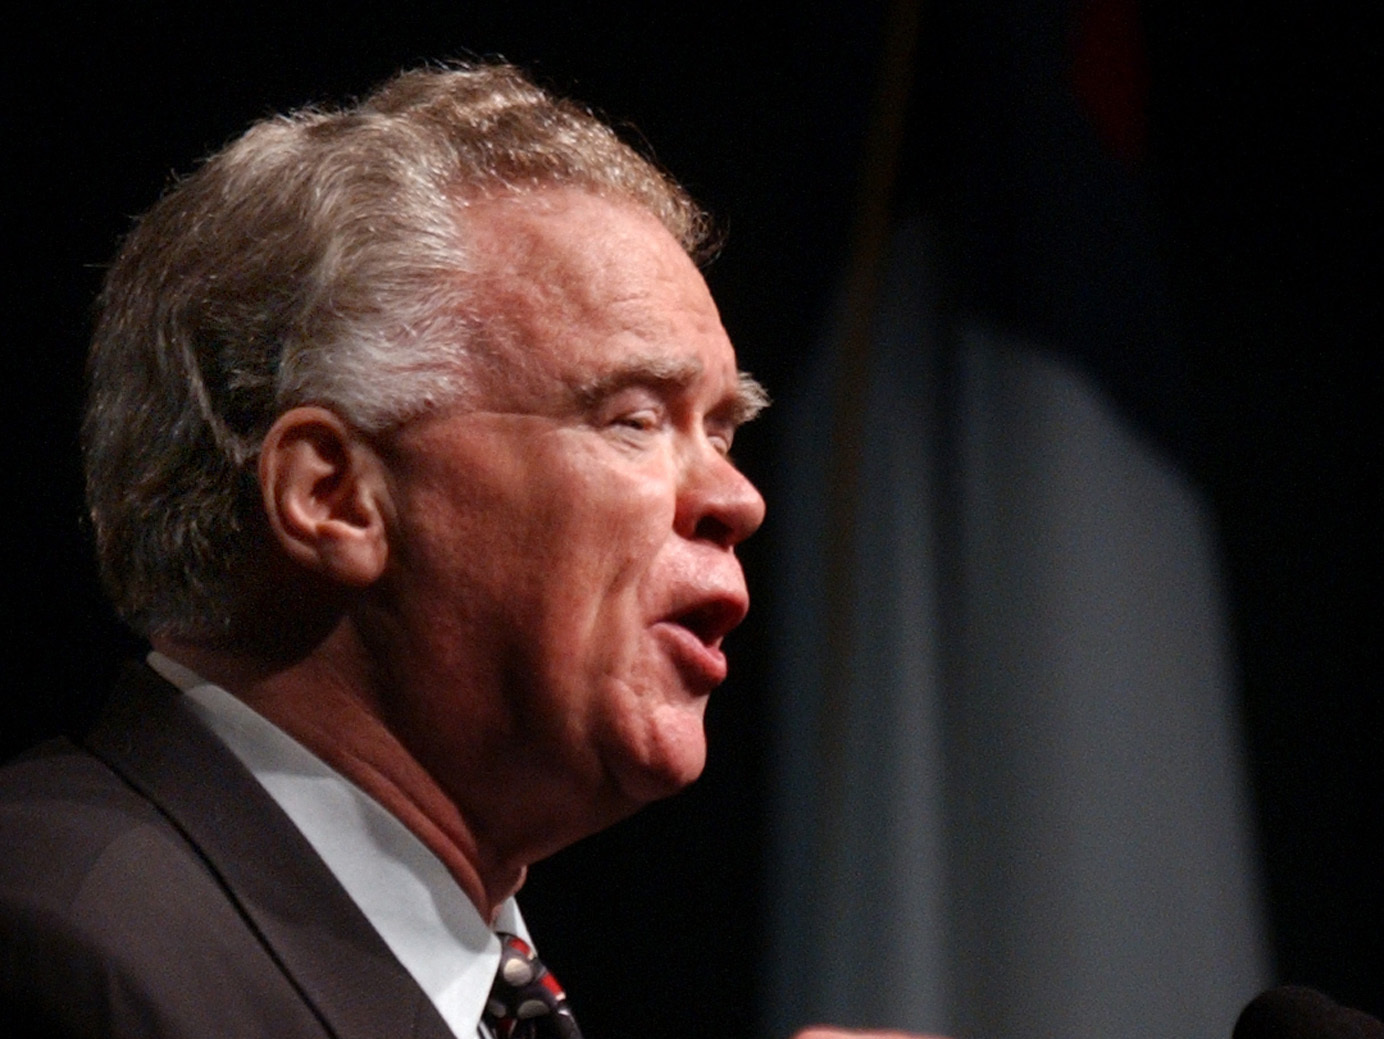 Paige Patterson, president of the Southwestern Baptist Theological Seminary in Fort Worth, Texas, speaks at a meeting in Indianapolis in 2004.